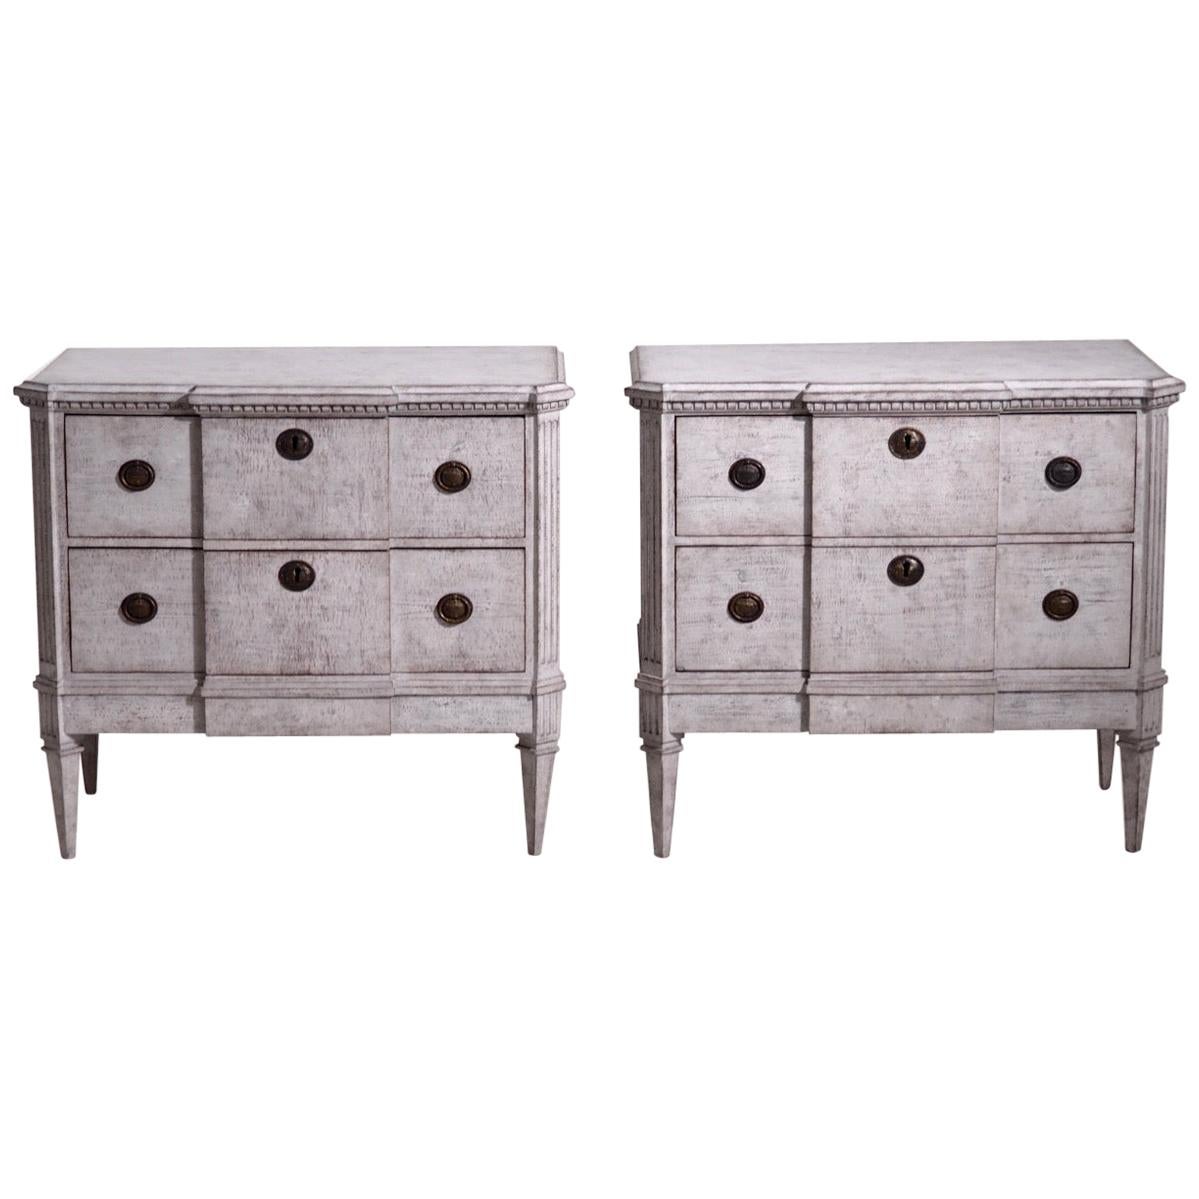 Pair of Gustavian Break-Front Chests, 19th Century